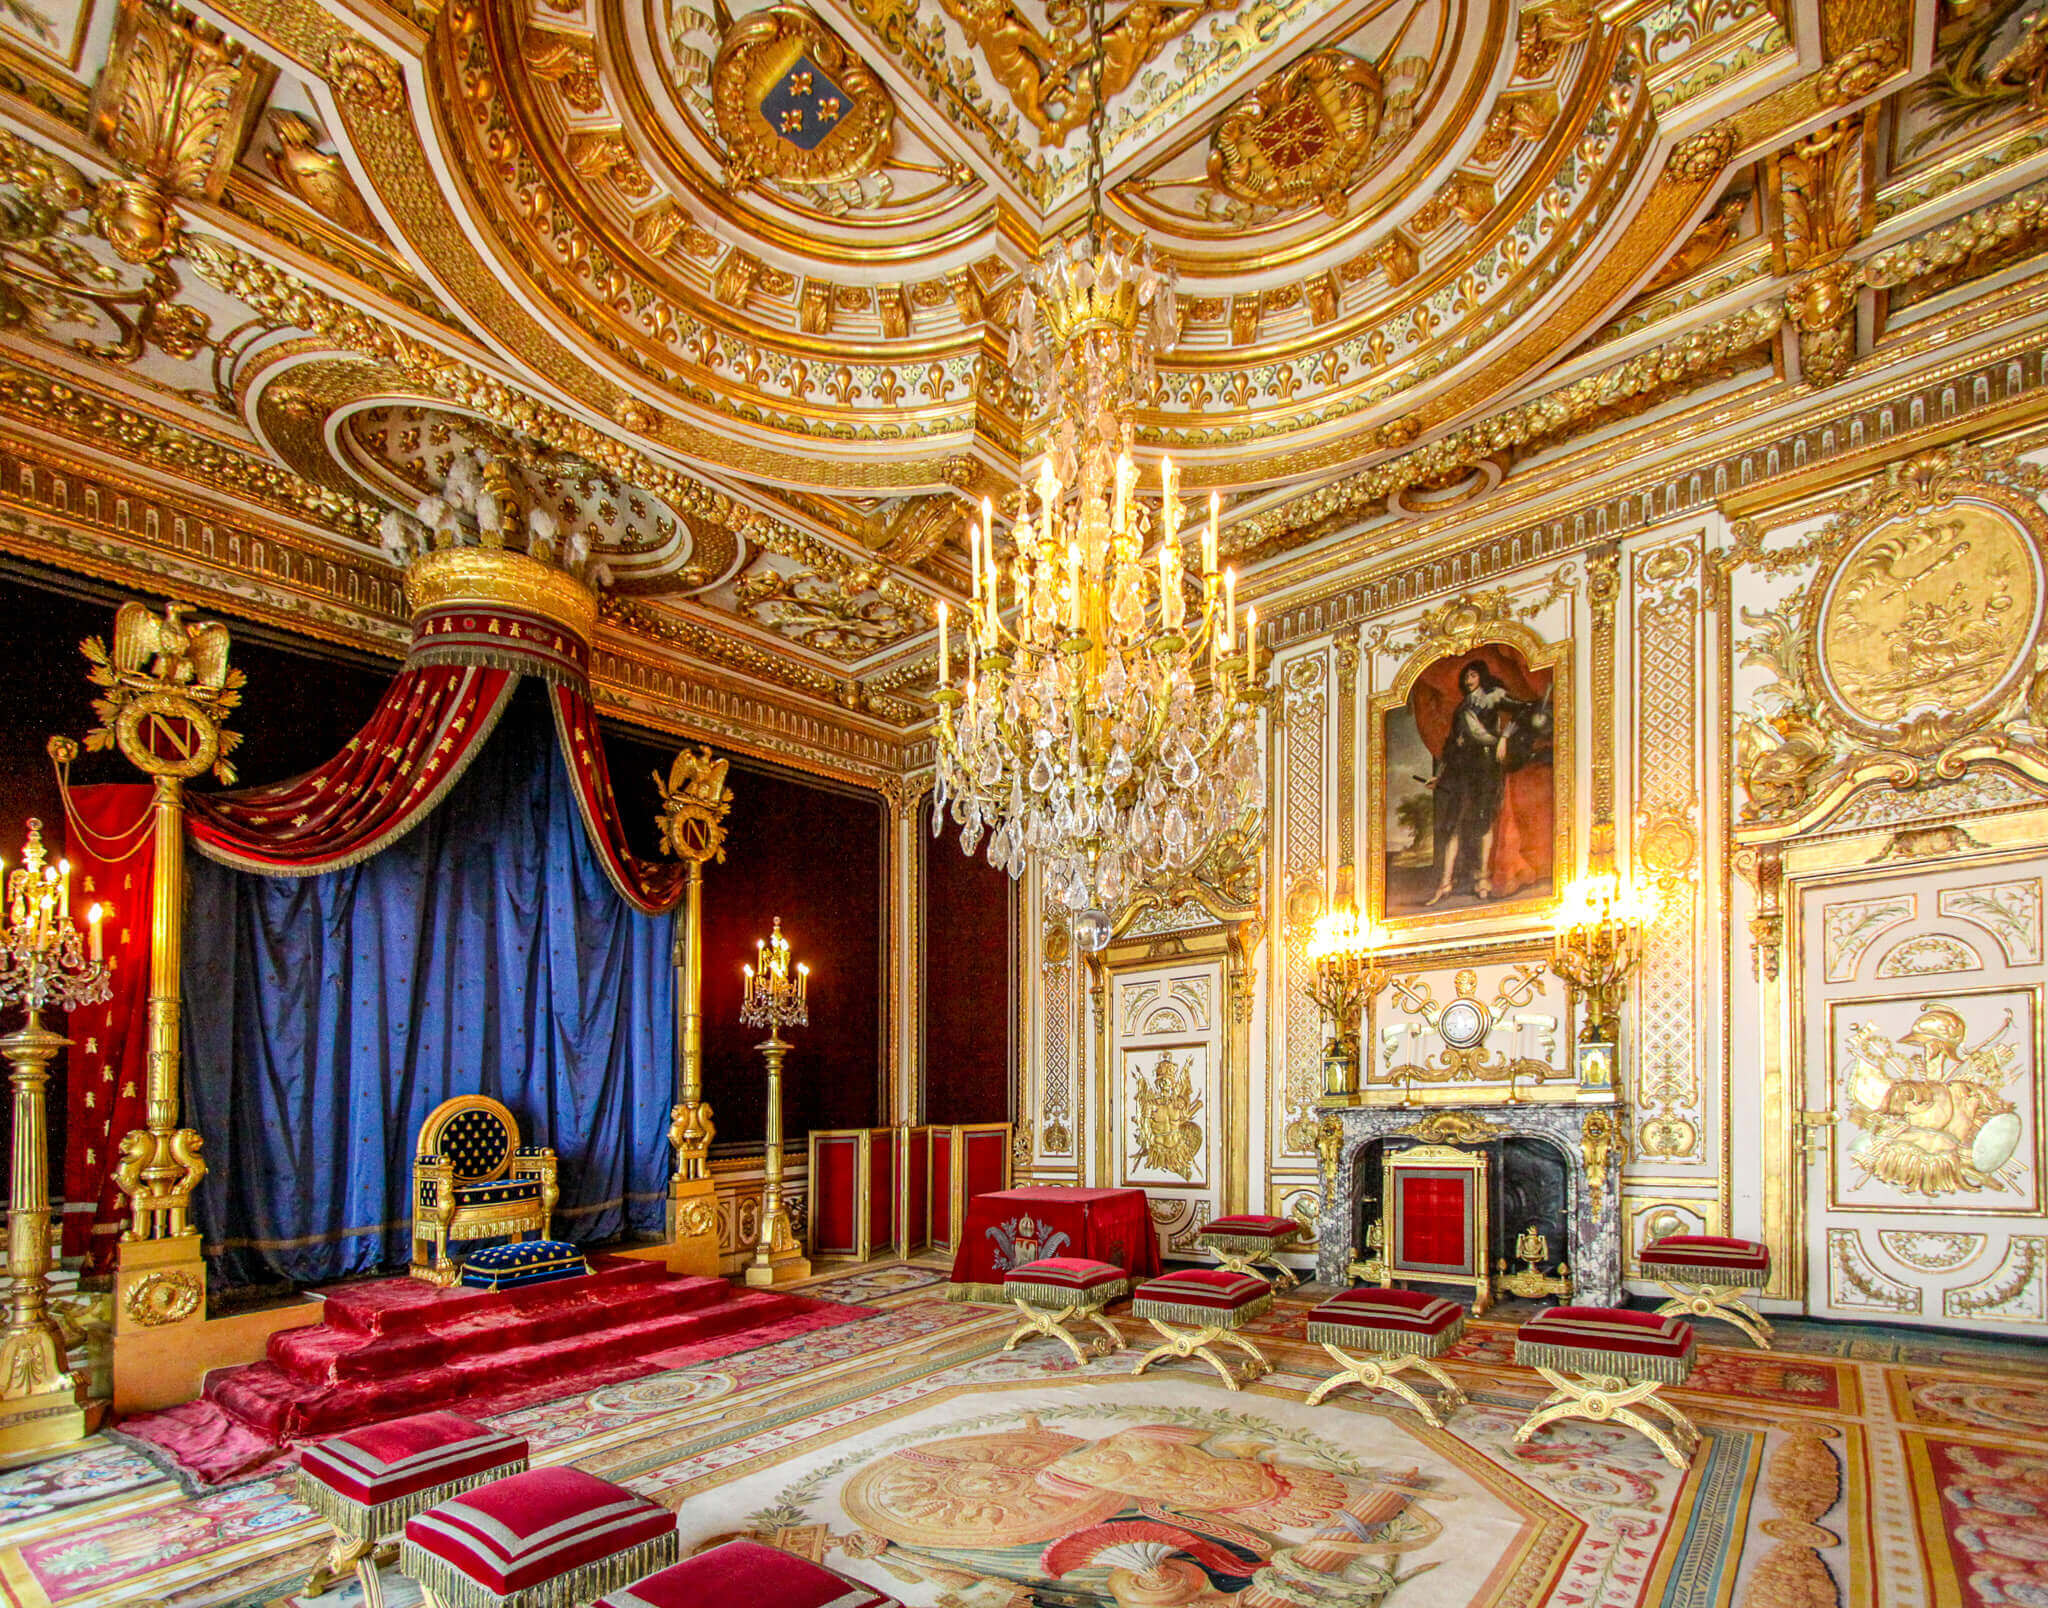 Napoleon's throne room in Fontainebleau castle was the former bedroom of the Kings of France from Henri IV to Louis XVI